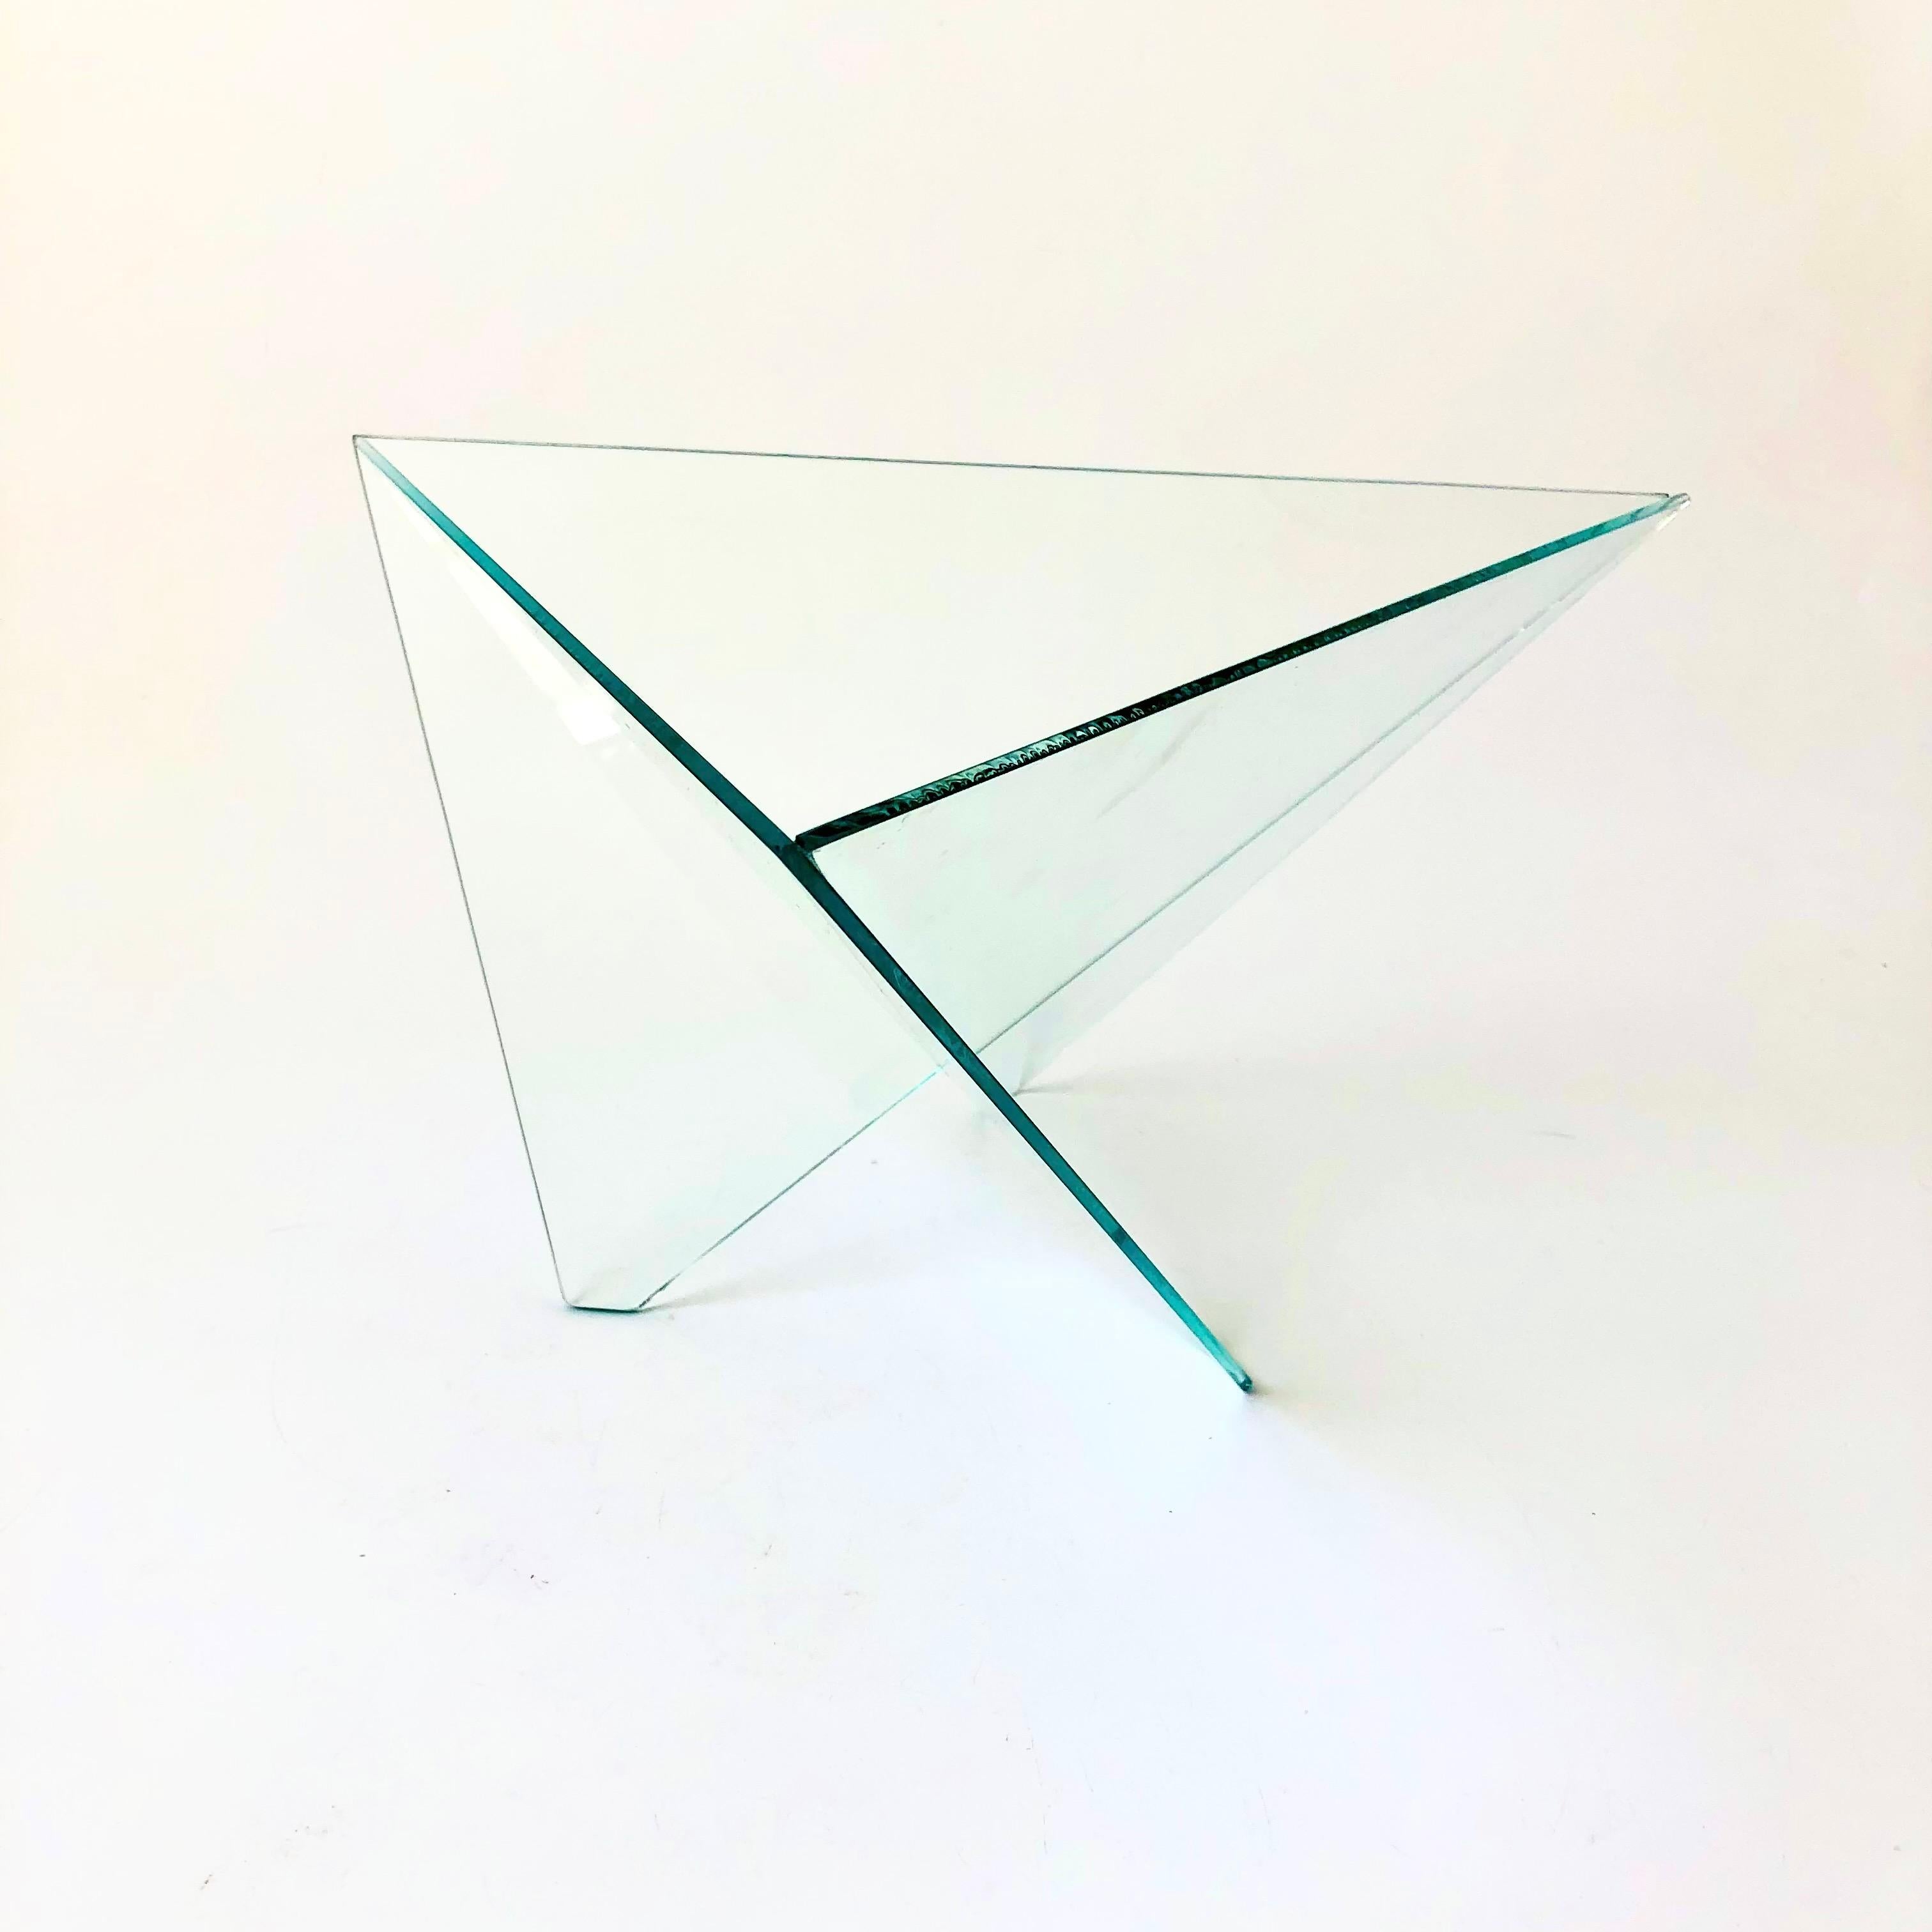 A vintage postmodern glass bowl created by Side Three Studio in 1988. A great sculptural triangular shape is created by 3 angled panes of glass that have been fused together. Large in size, perfect for using as a fruit bowl or for a floral